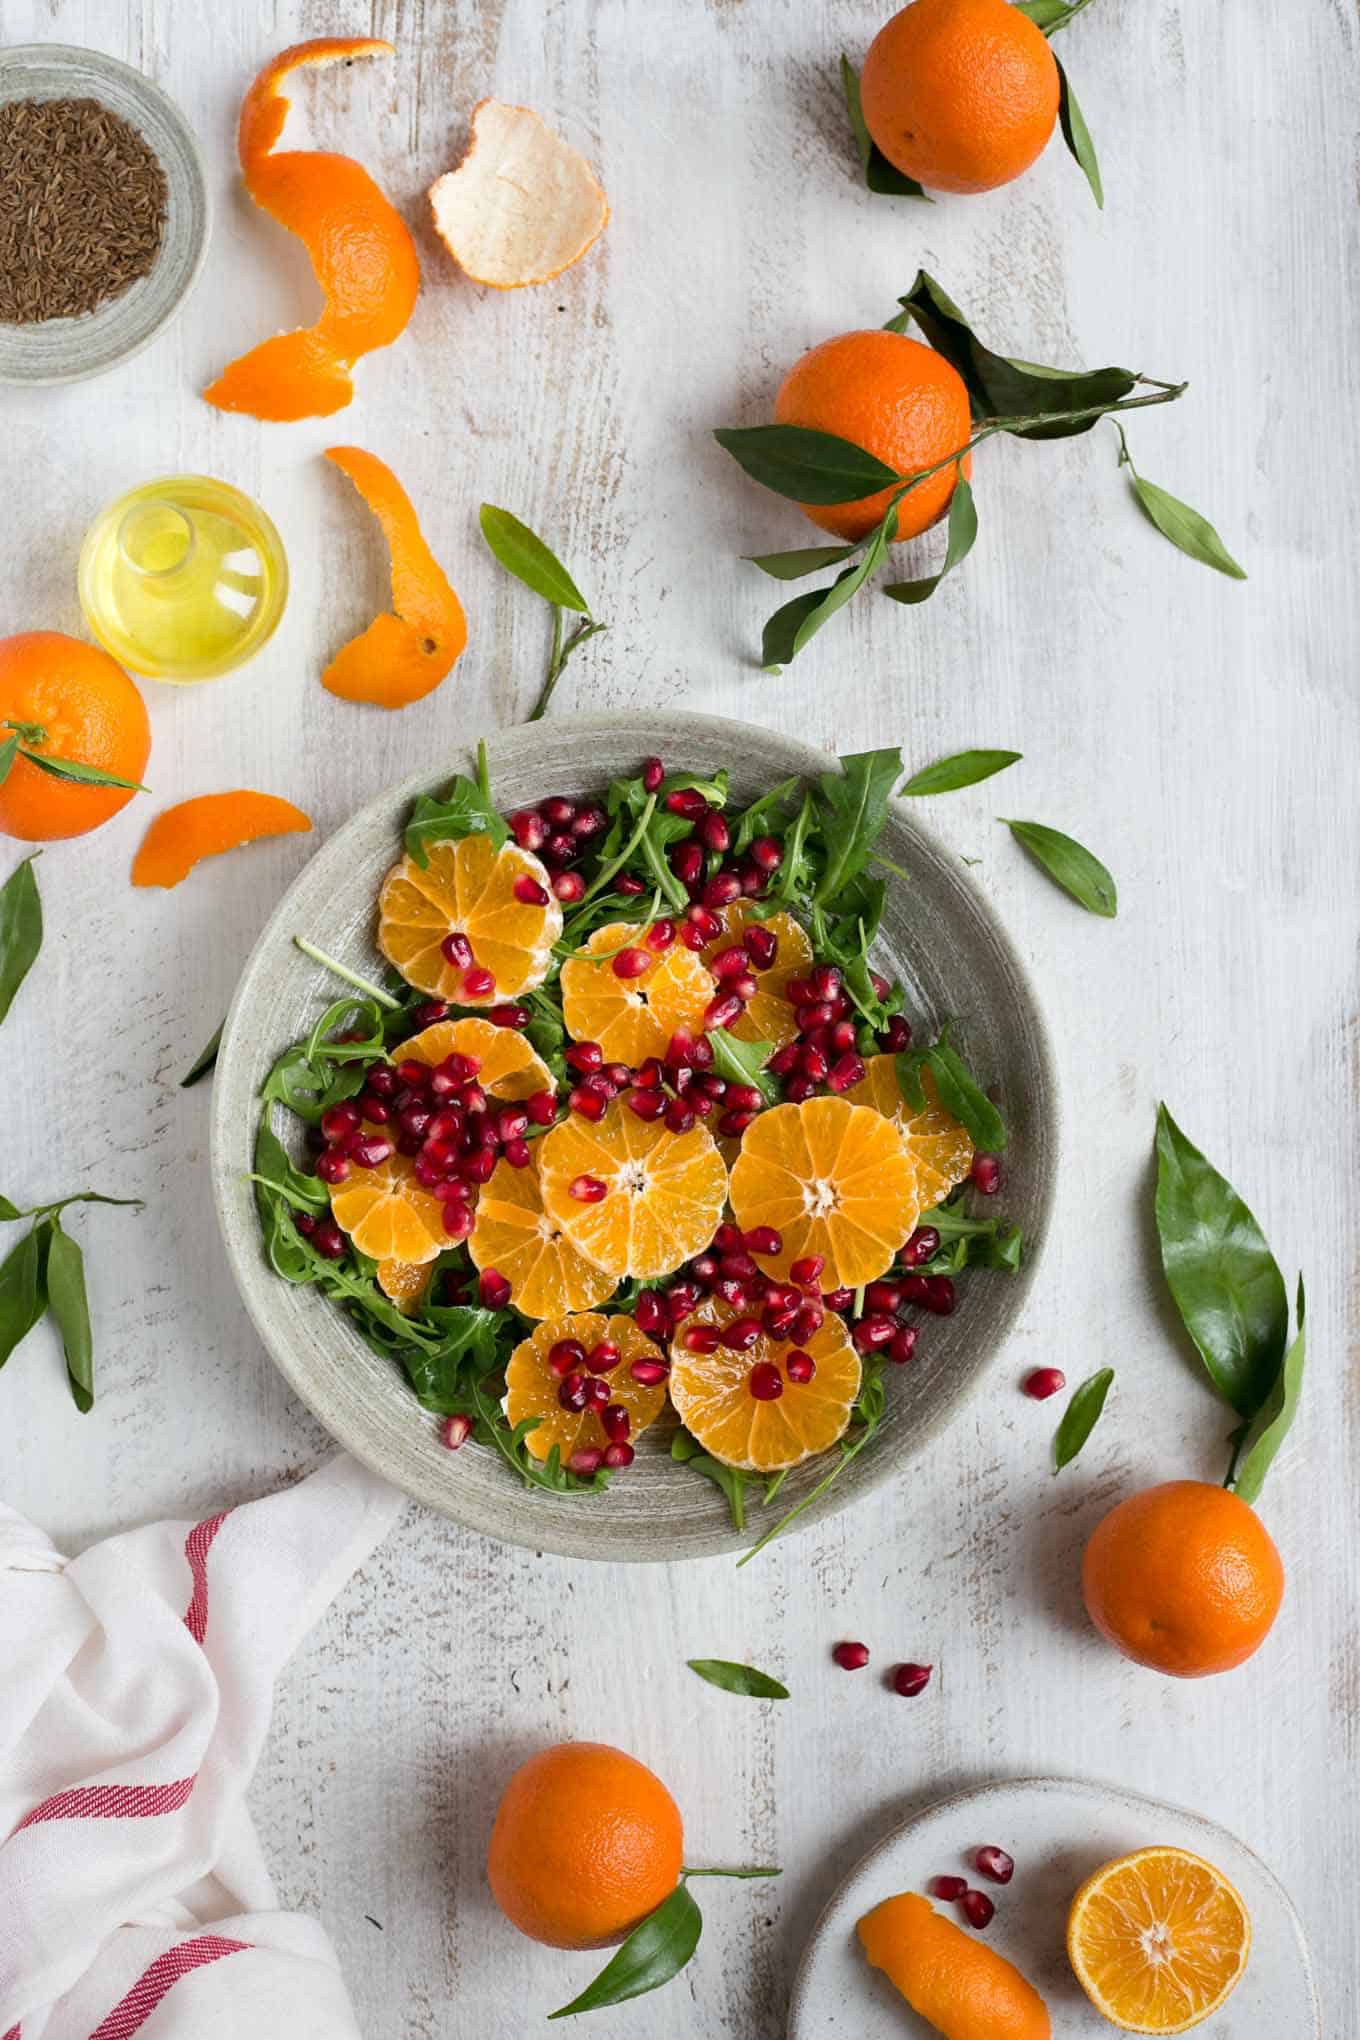 Avocado and clementine salad with pomegranate and tangy dressing #vegan #dairyfree #healthy | via @annabanana.co